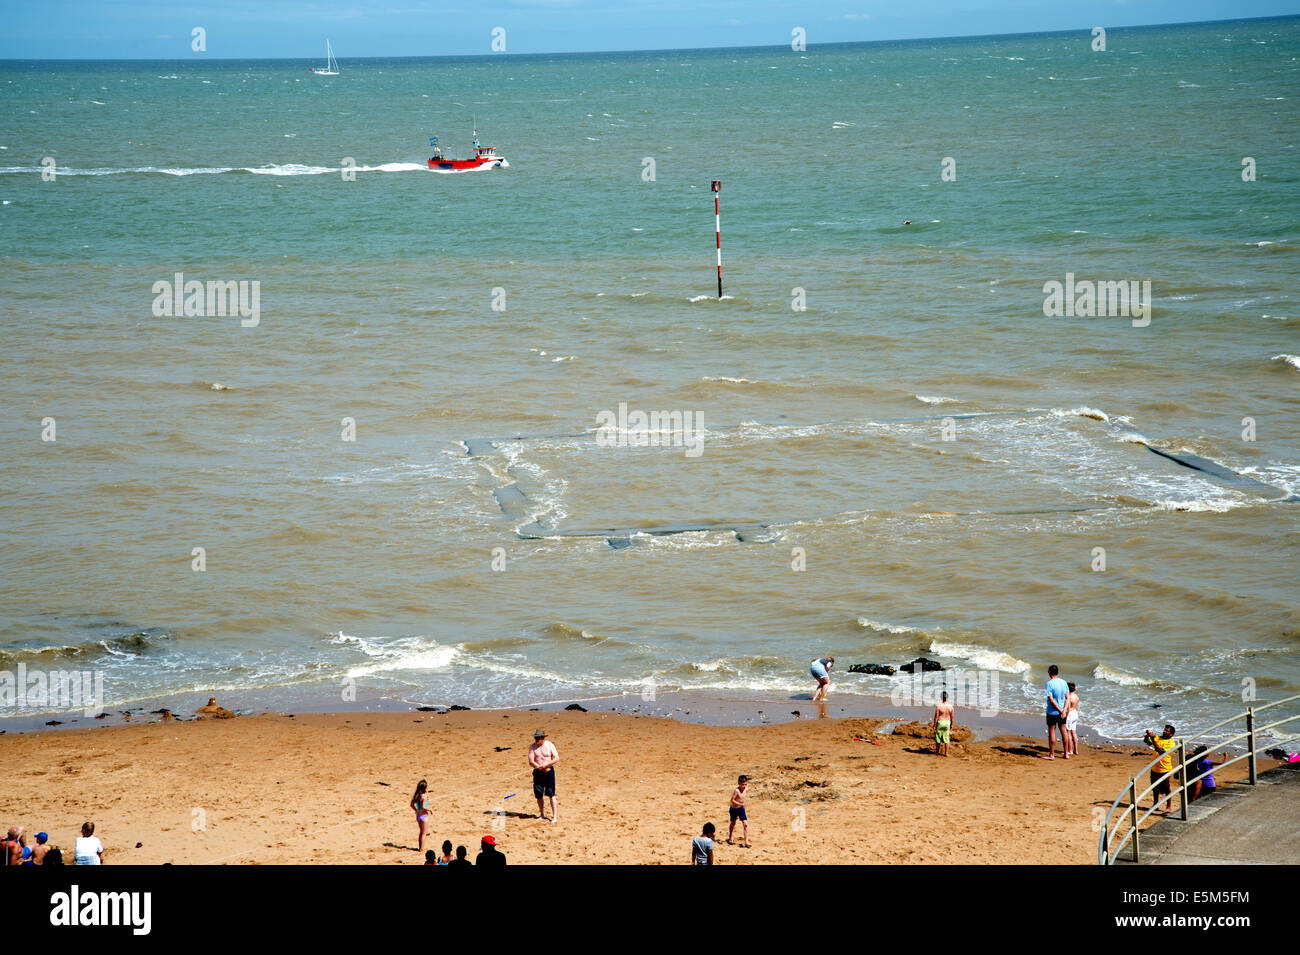 Broadstairs, Kent. Submerged sea swimming pool with people on the beach Stock Photo